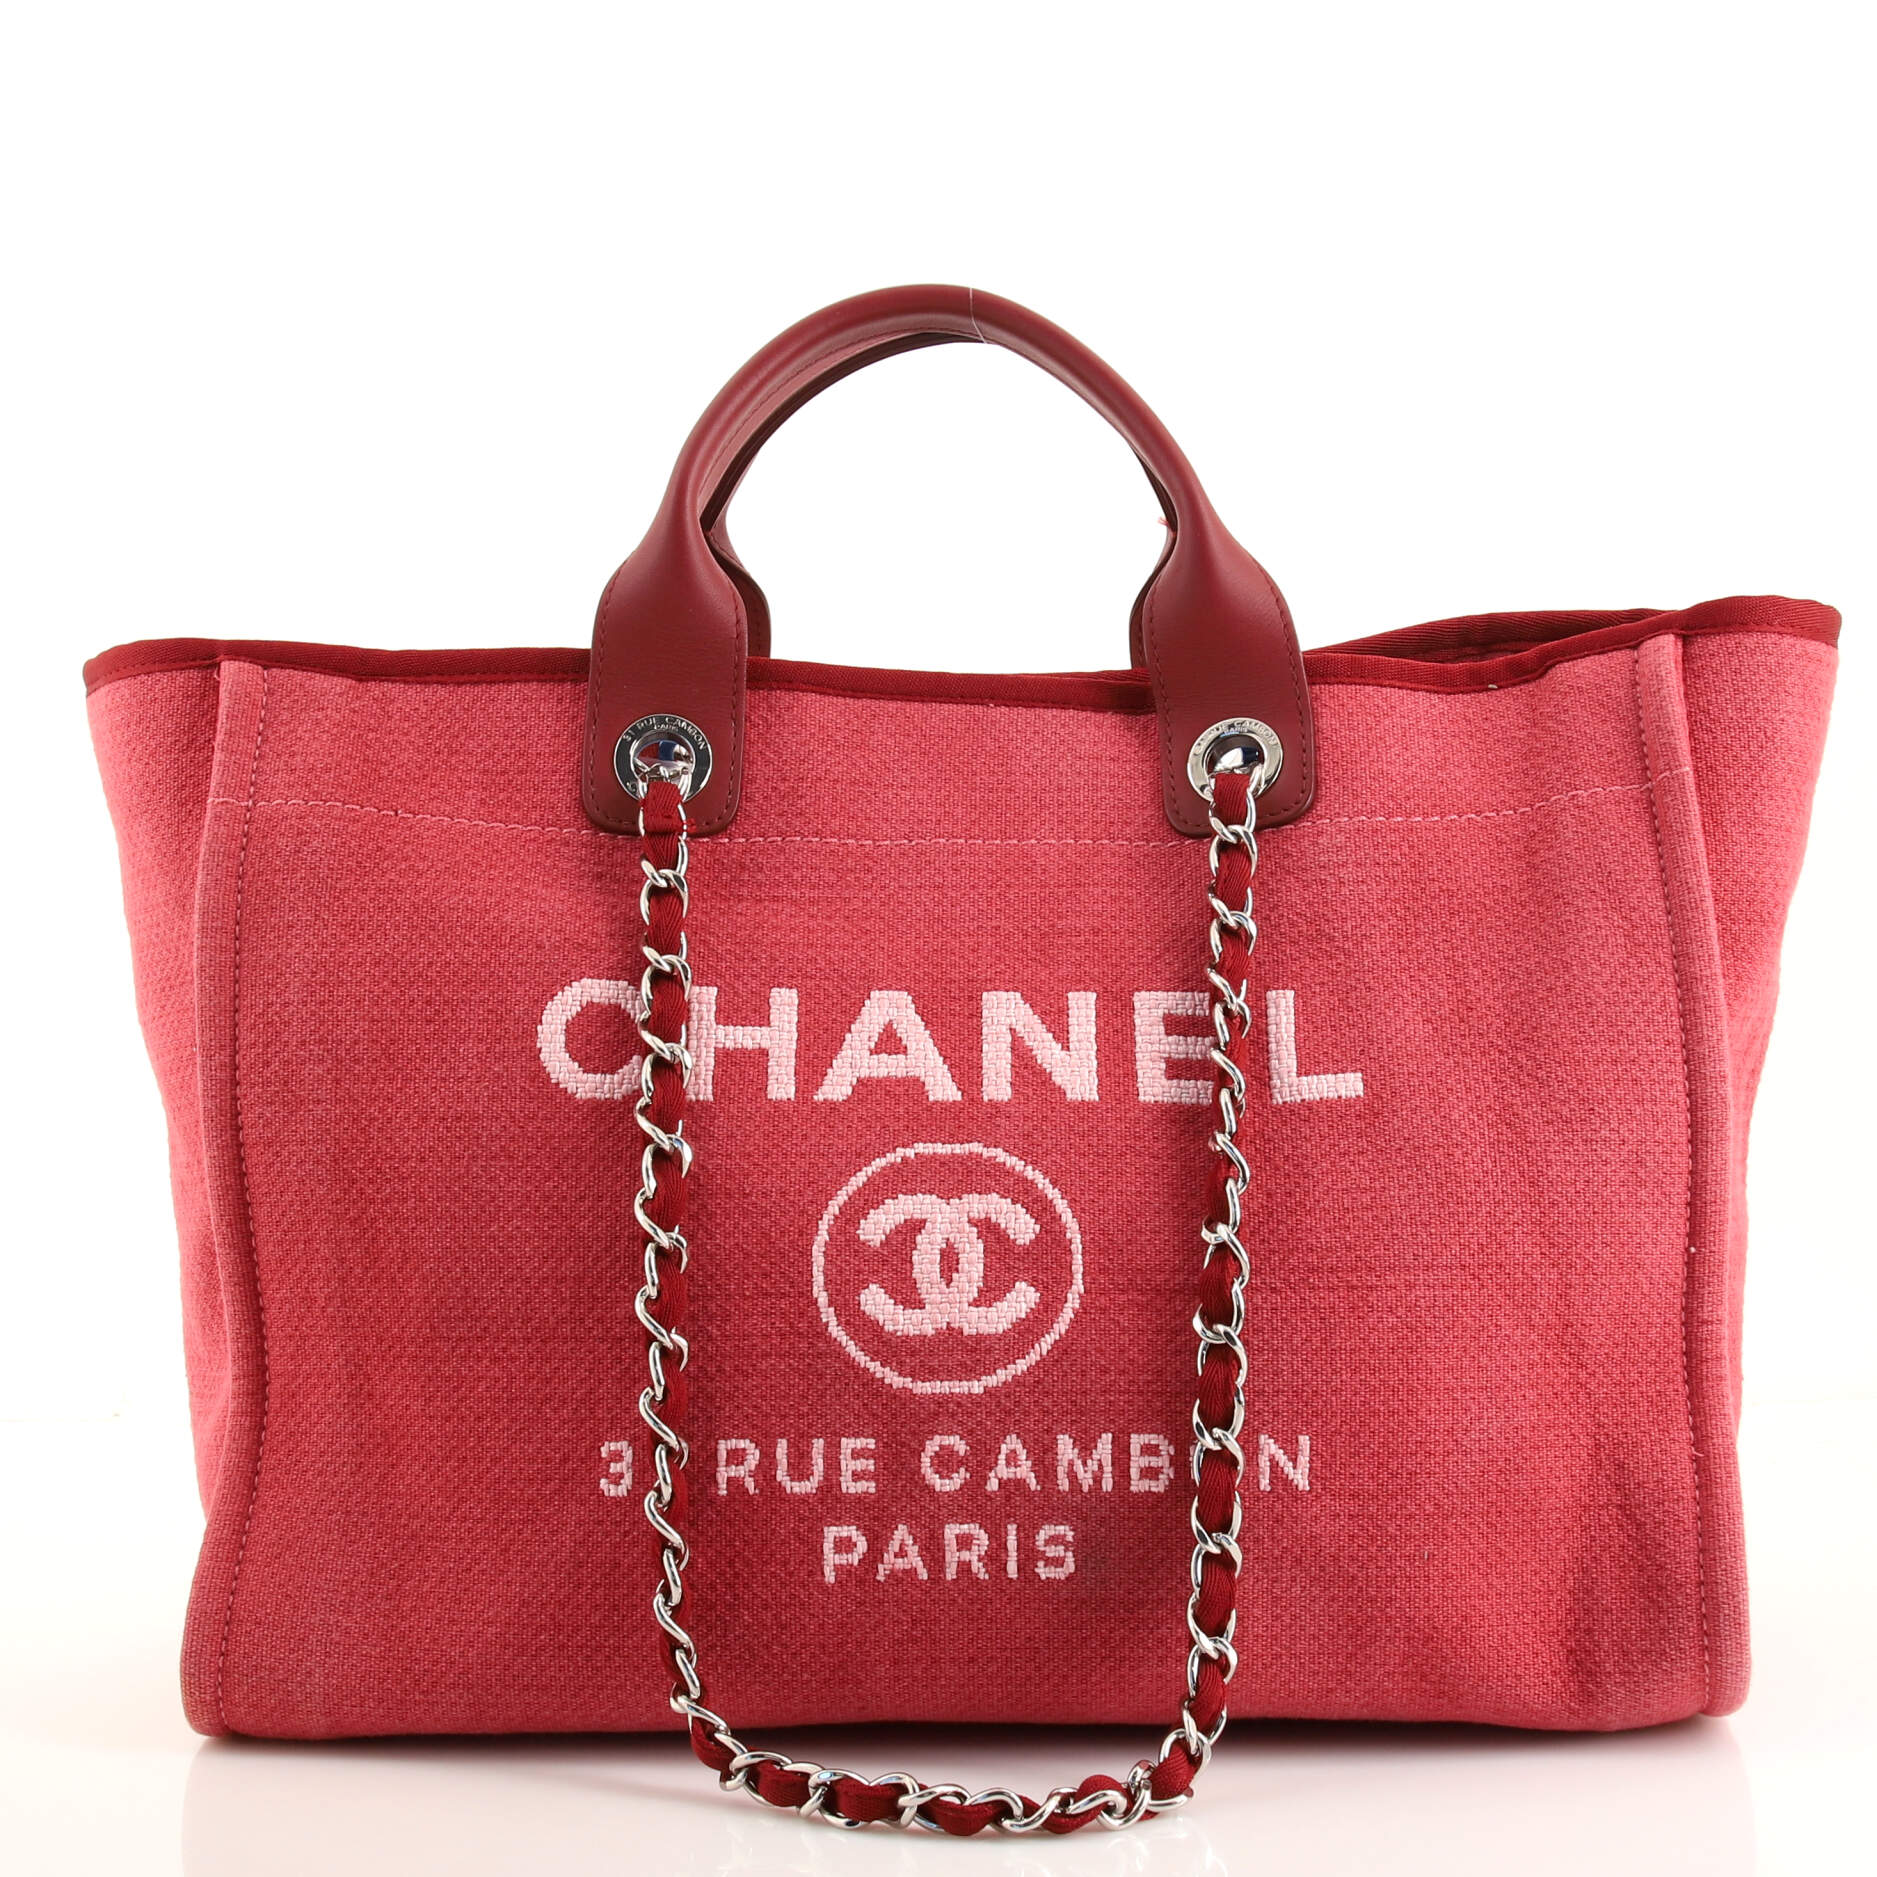 Great selection at great prices18 Things You Probably Didn't Know About Me  - Fashion Jackson, chanel handbags for women 